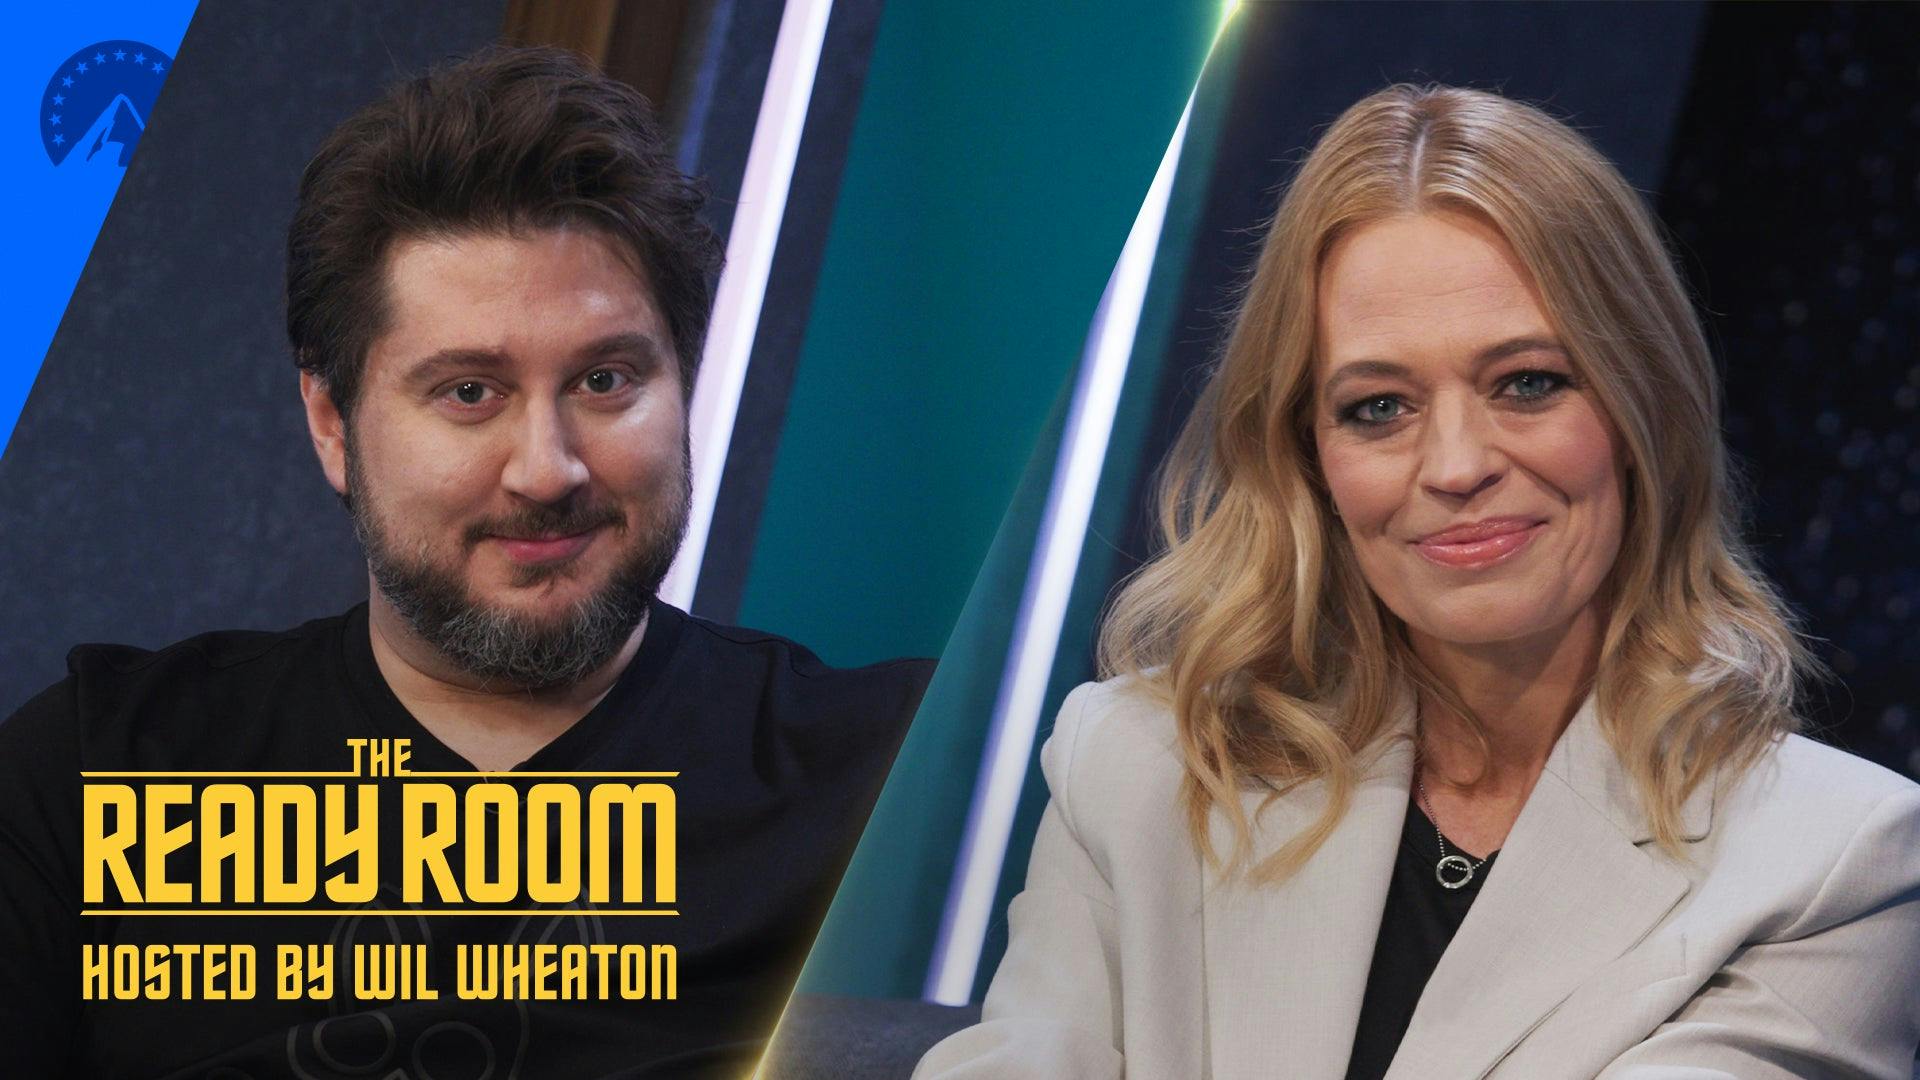 Terry Matalas and Jeri Ryan join The Ready Room